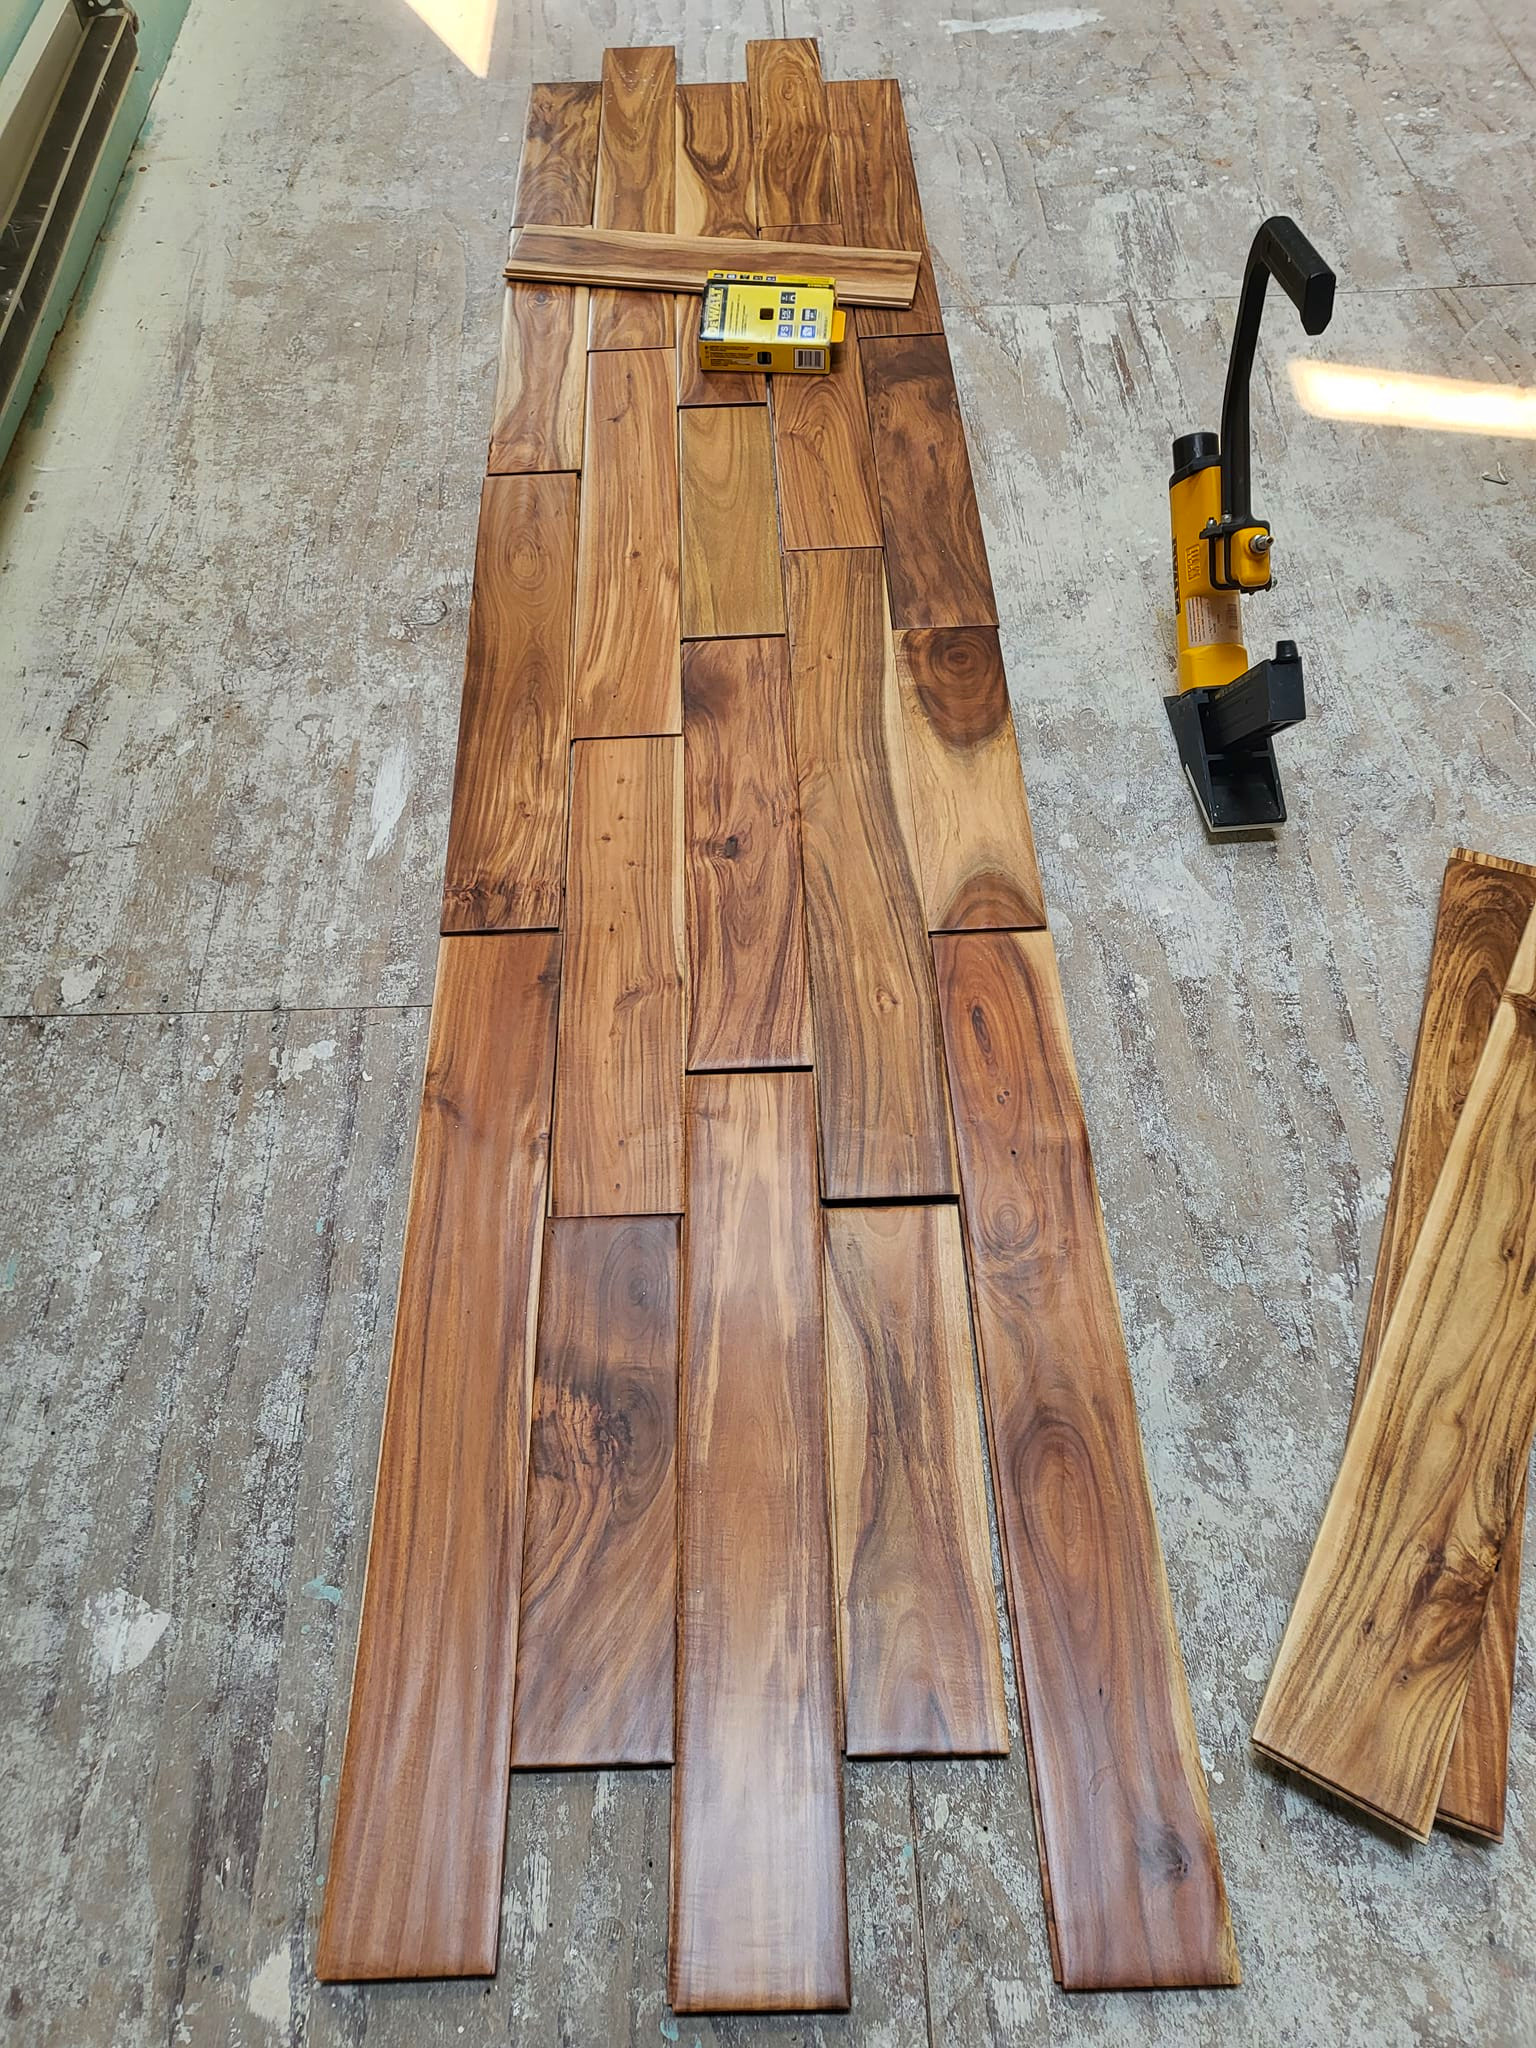 some planks mid install of close up of Tobacco Road Acacia hardwood flooring from ll flooring